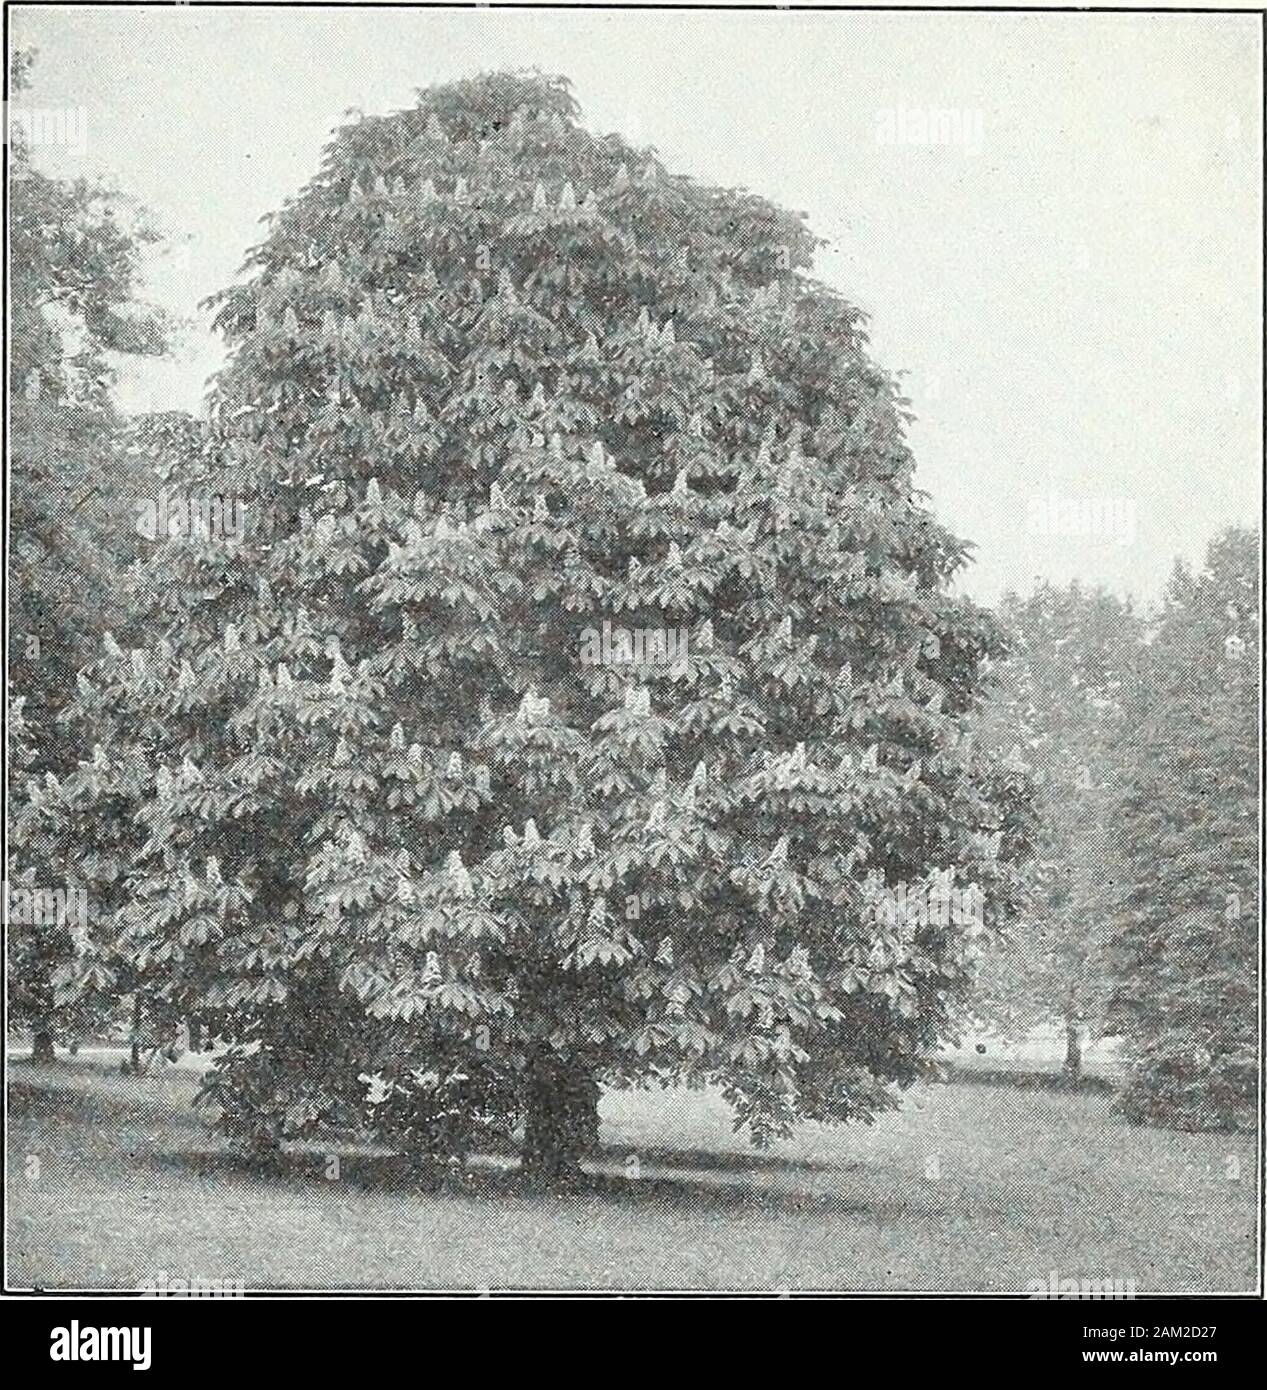 Farquhar's garden annual : 1922 . 6.00 polymorphum var. atro-dissectum. {Cut leavedPurple Japanese Maple). Of drooping growthwith out leaves of fern-like appearance. 2 to 3 ft.. 6.00 rubrum. {Red or Scarlet Maple.) A native treeproducing red blossoms before the leaves. Foliagechanges in Autumn to brilliant scarlet. 8 to 10 ft.. . 3. 00 33. 00 dasycarpum var. Wierii laciniatum. {Weirs Cutleaved Maple). A graceful tree with deeply cut foli-age and recurving pendulous branches. 6 to 8 ft.. . 2.25 platanoides, var. Schwedlerii. {Schwedlers NorwayMaple.) The young foliage of this variety is brightc Stock Photo